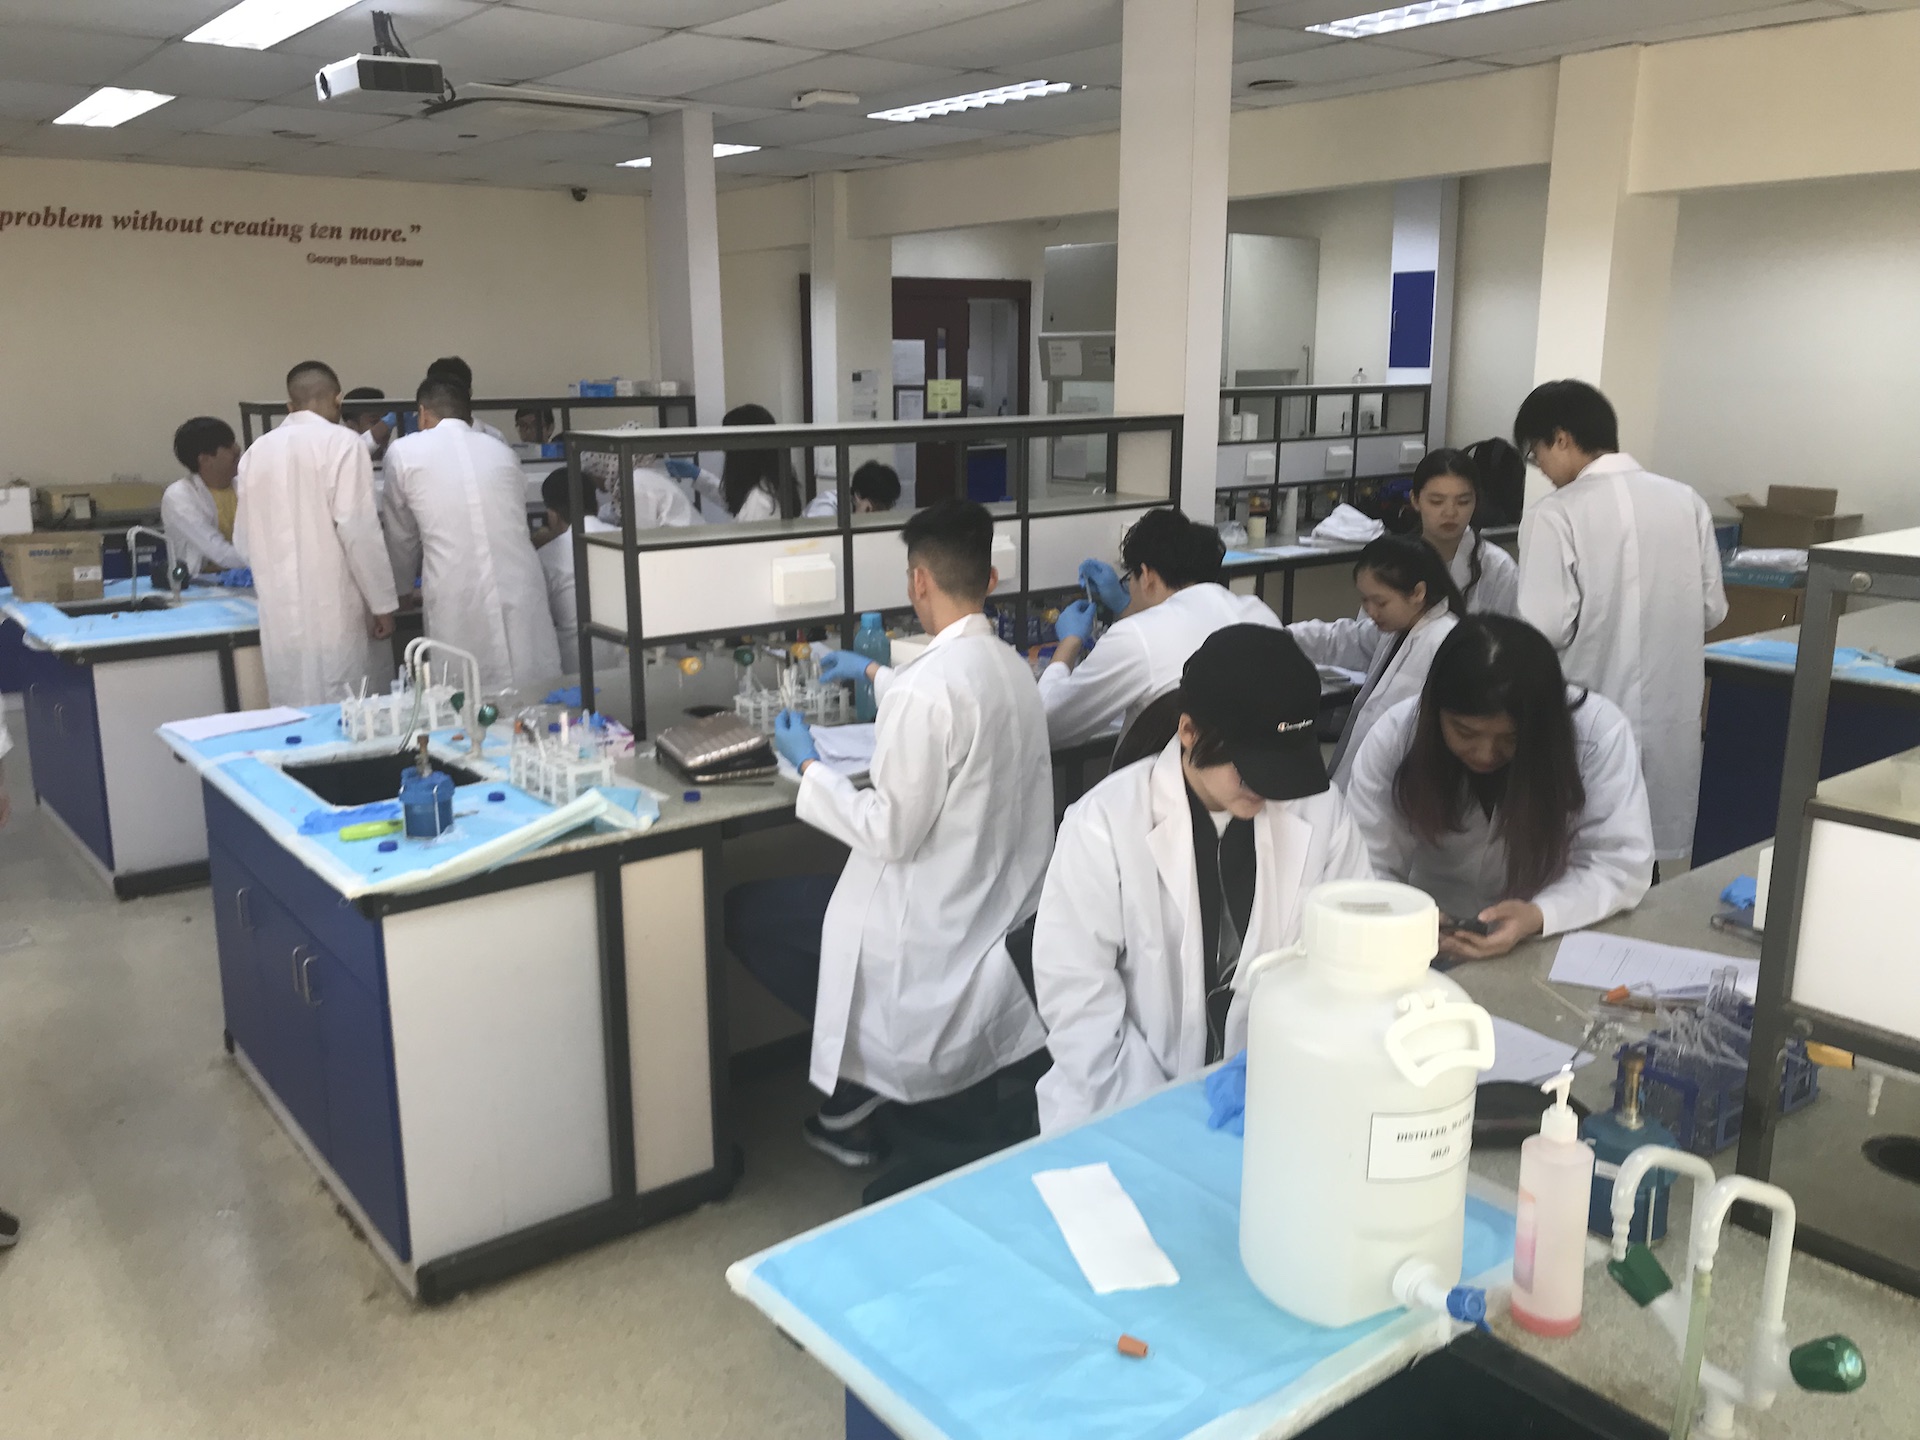 MDIS students working on a mini experiment at the science lab.